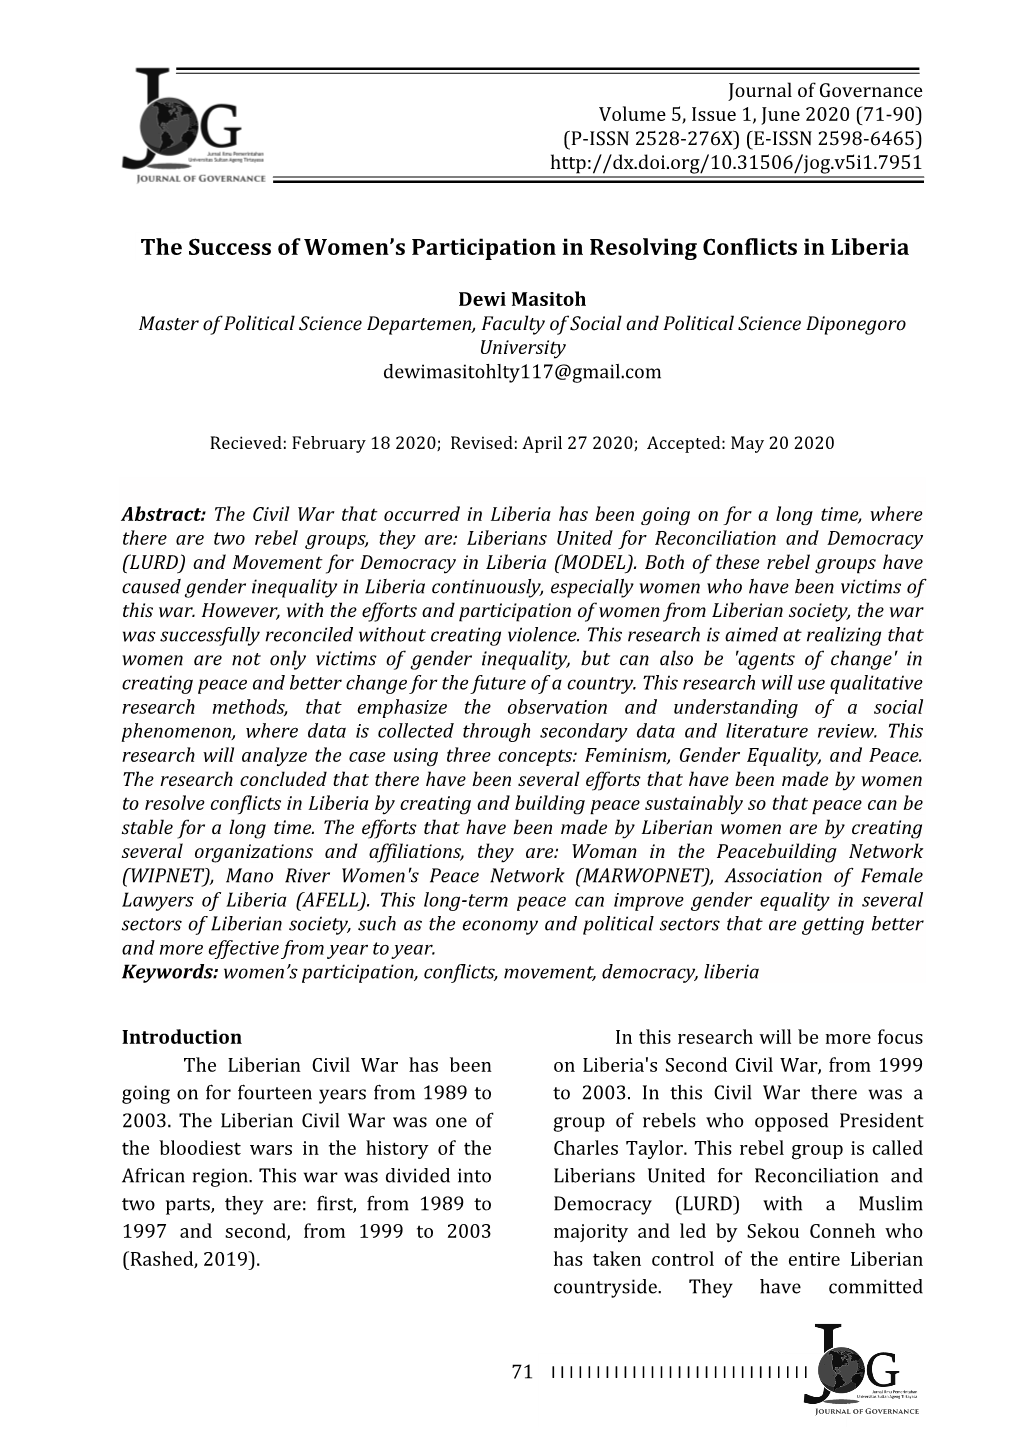 The Success of Women's Participation in Resolving Conflicts in Liberia